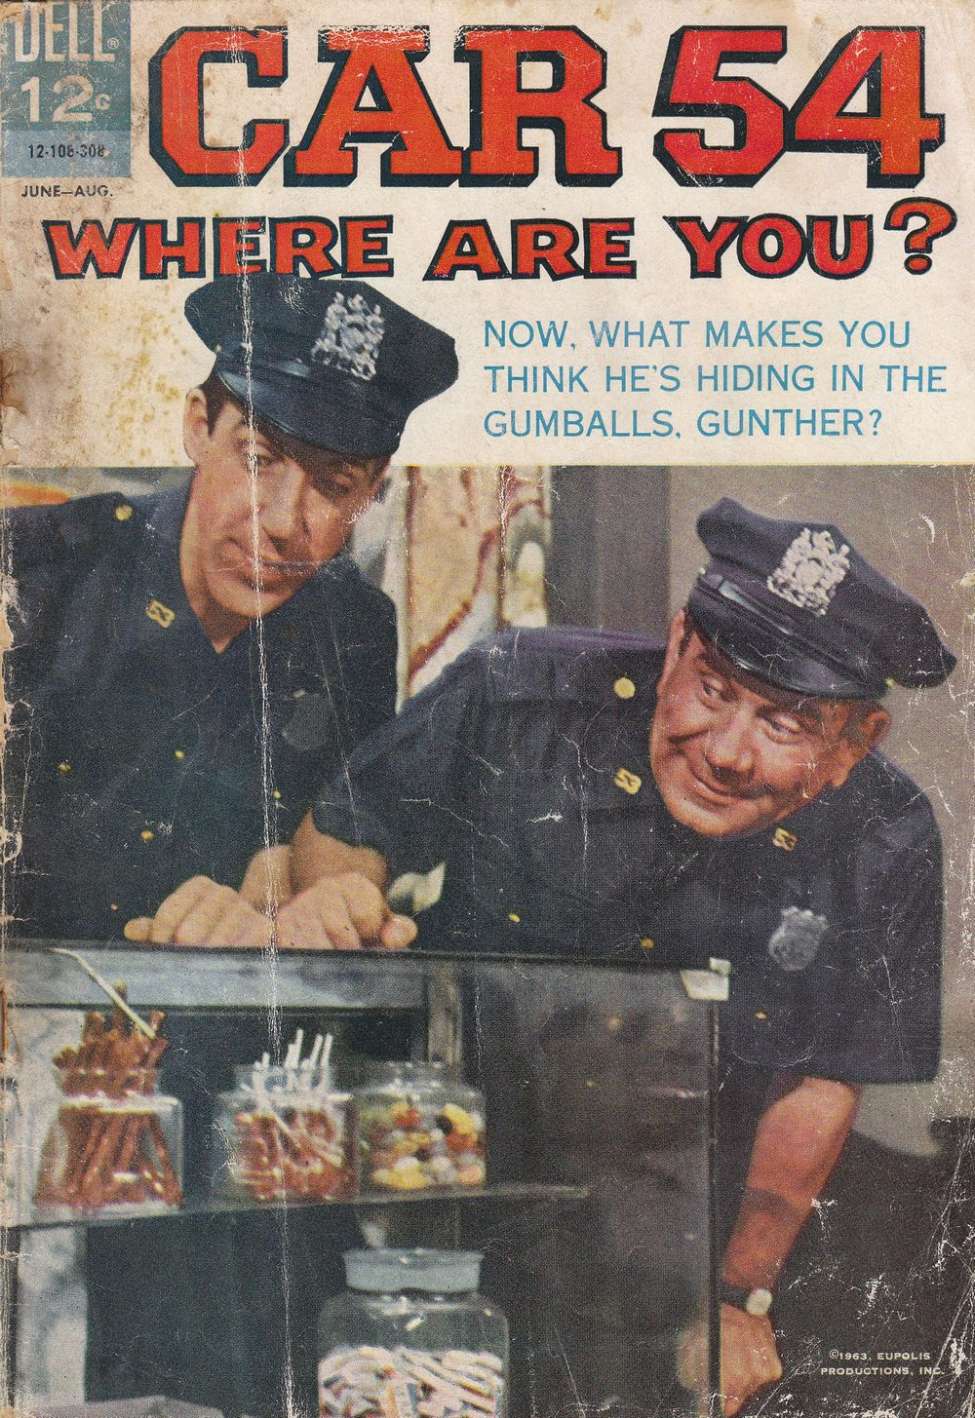 Book Cover For Car 54, Where Are You? 6